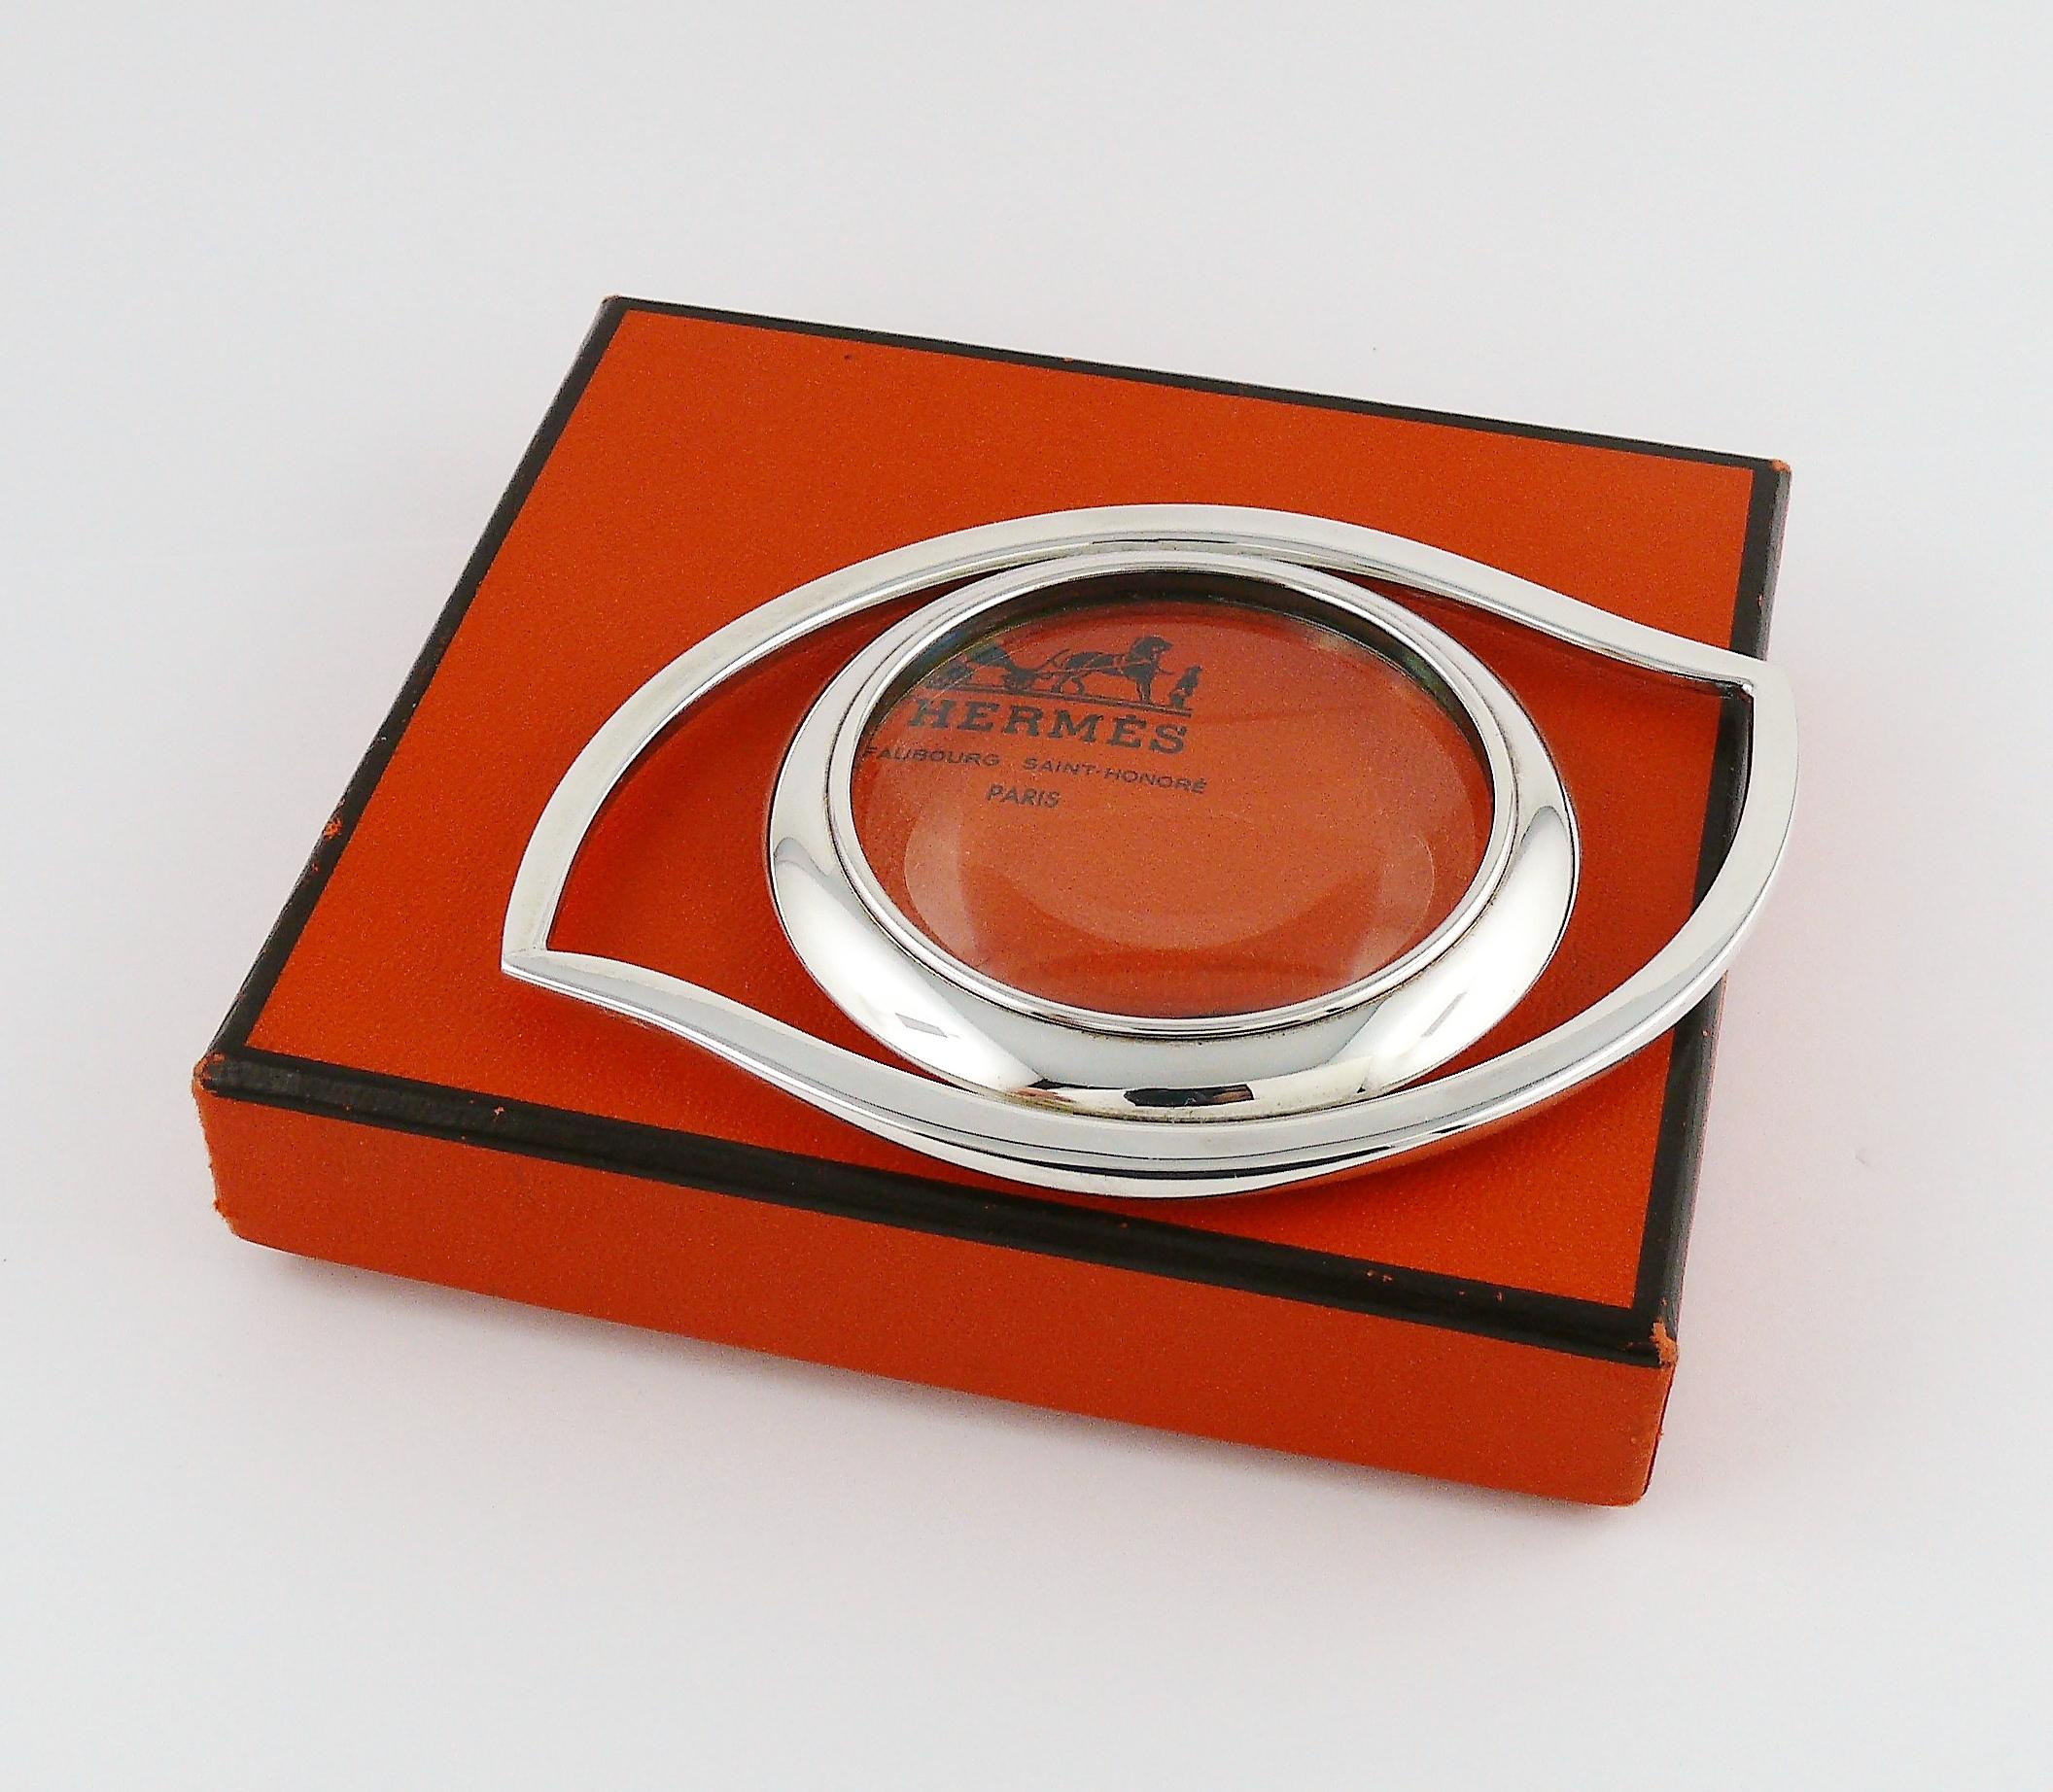 HERMES silver toned desk magnifying glass and paperweight featuring a massive Egyptian Mythology inspired CLEOPATRA Eye.

Originally designed in the 1960’s by JEAN COCTEAU for the House of HERMES.

Can be worn also as a pendant.

Embossed HERMES